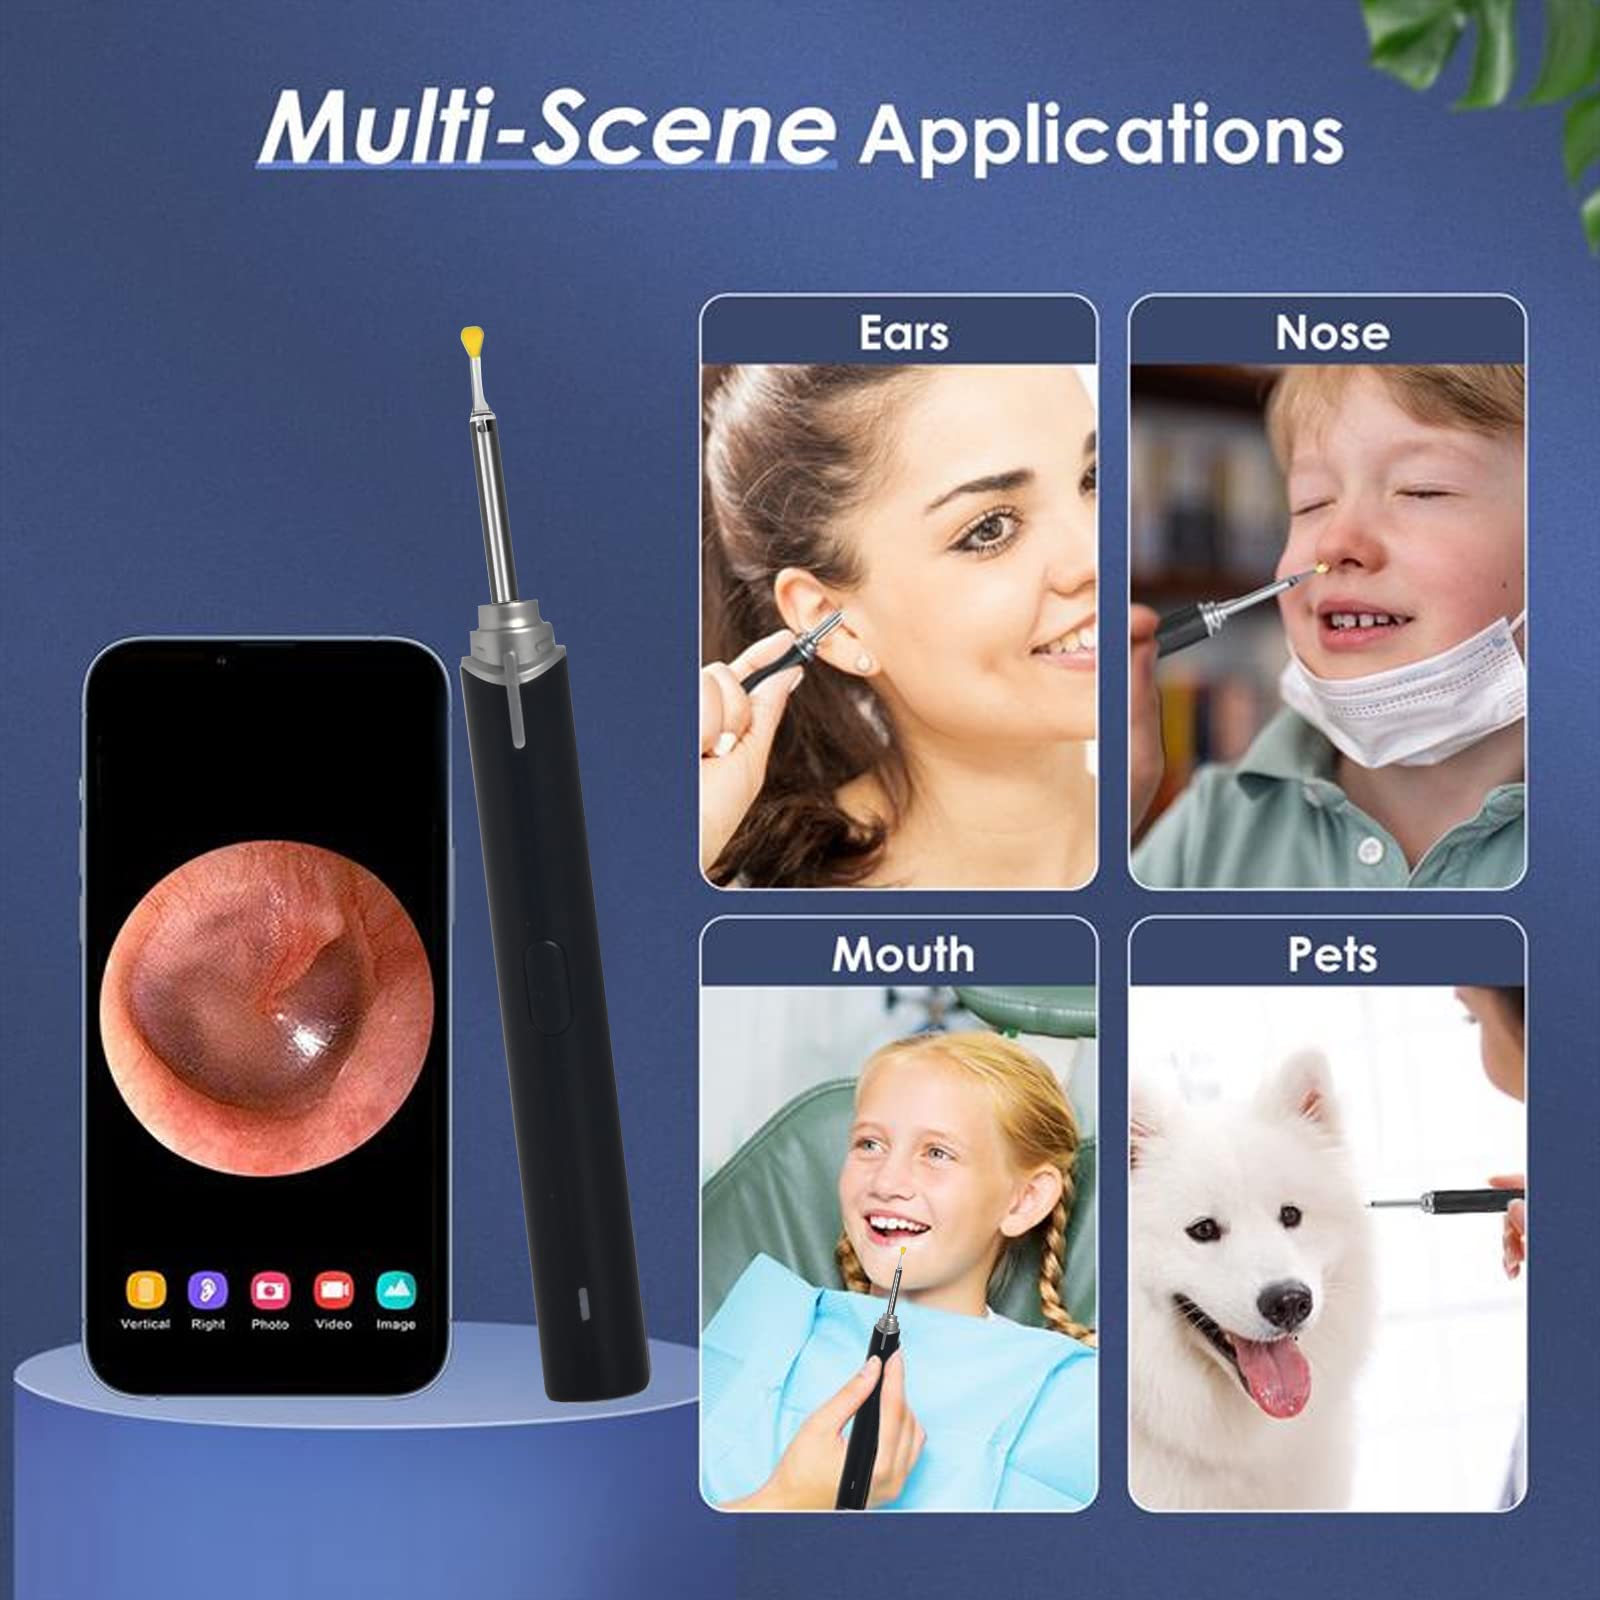 WiFi Ear Cleaner Earwax Removal Tool with Camera, Bright Light, Ear Cleaning kit, Compatible with iOS & Android